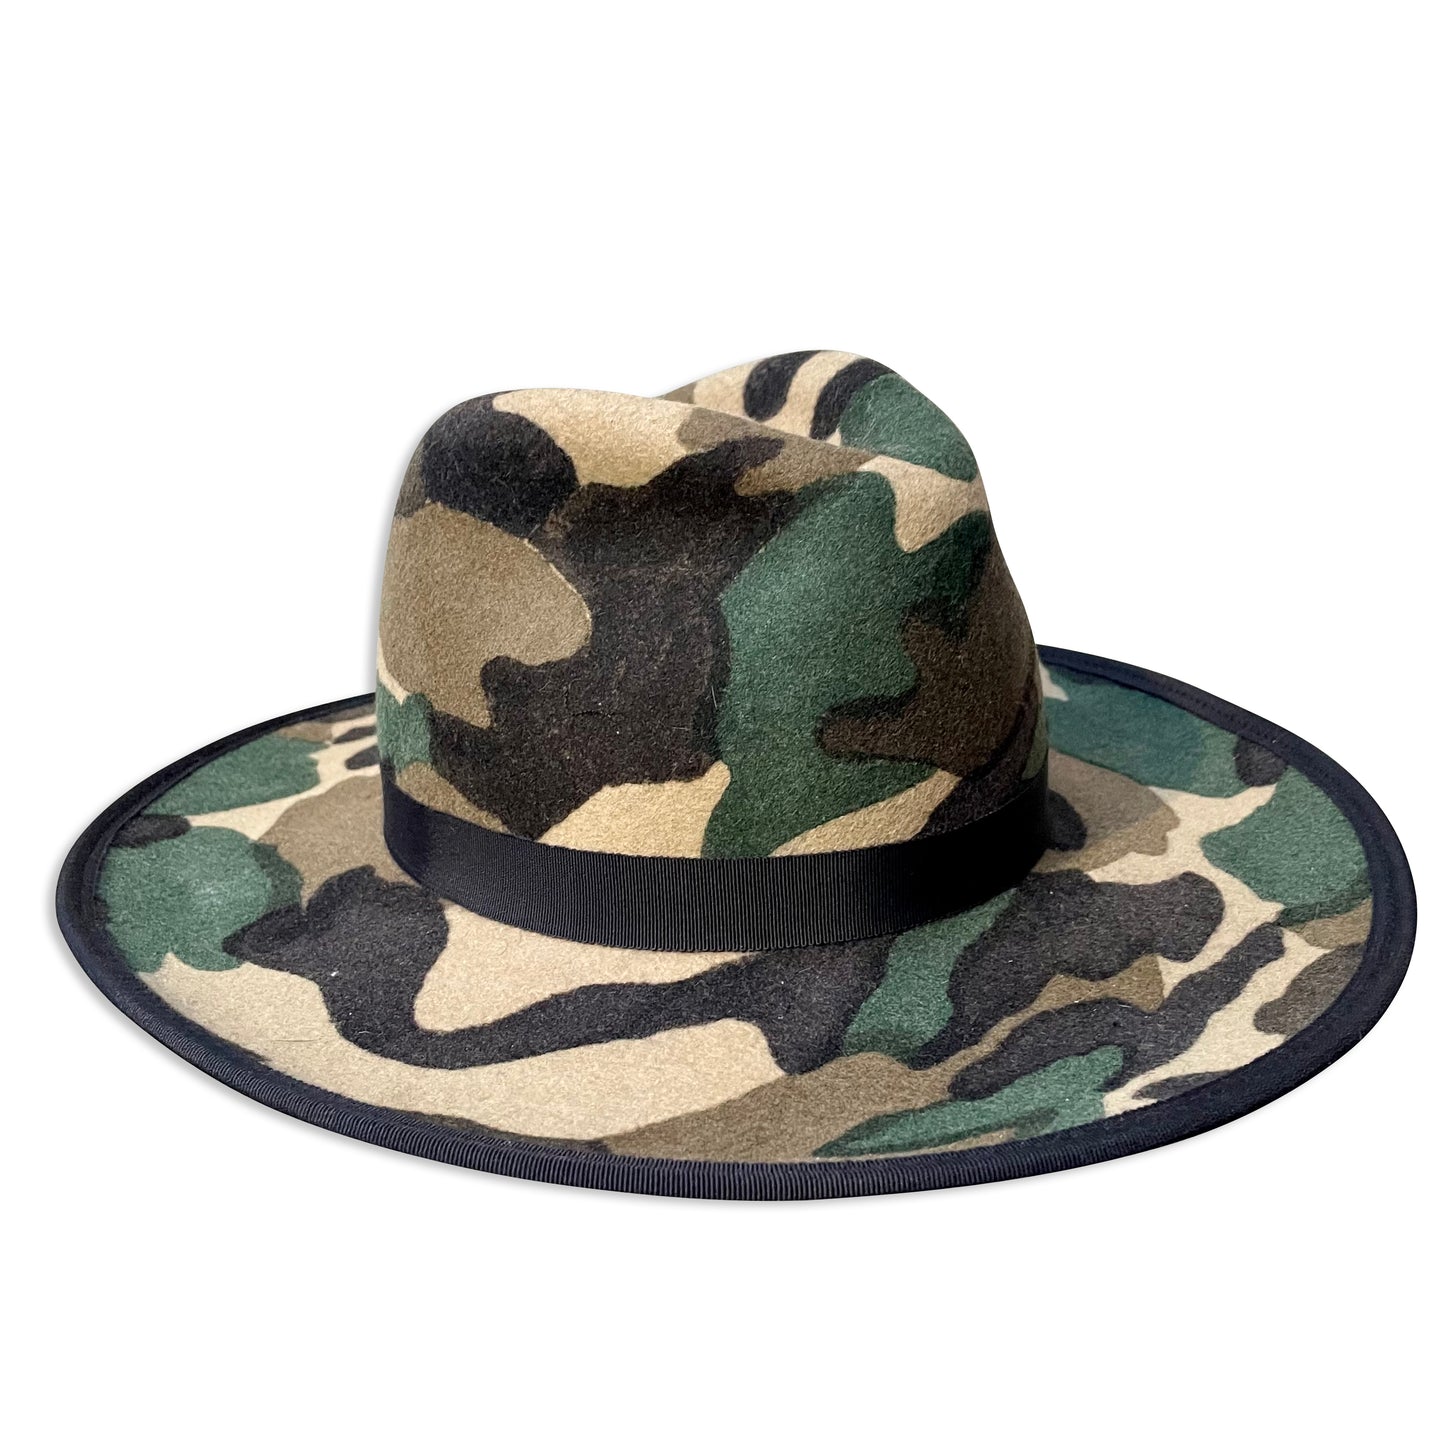 unique camouflage cowboy hat from Cha Cha's House of Ill Repute